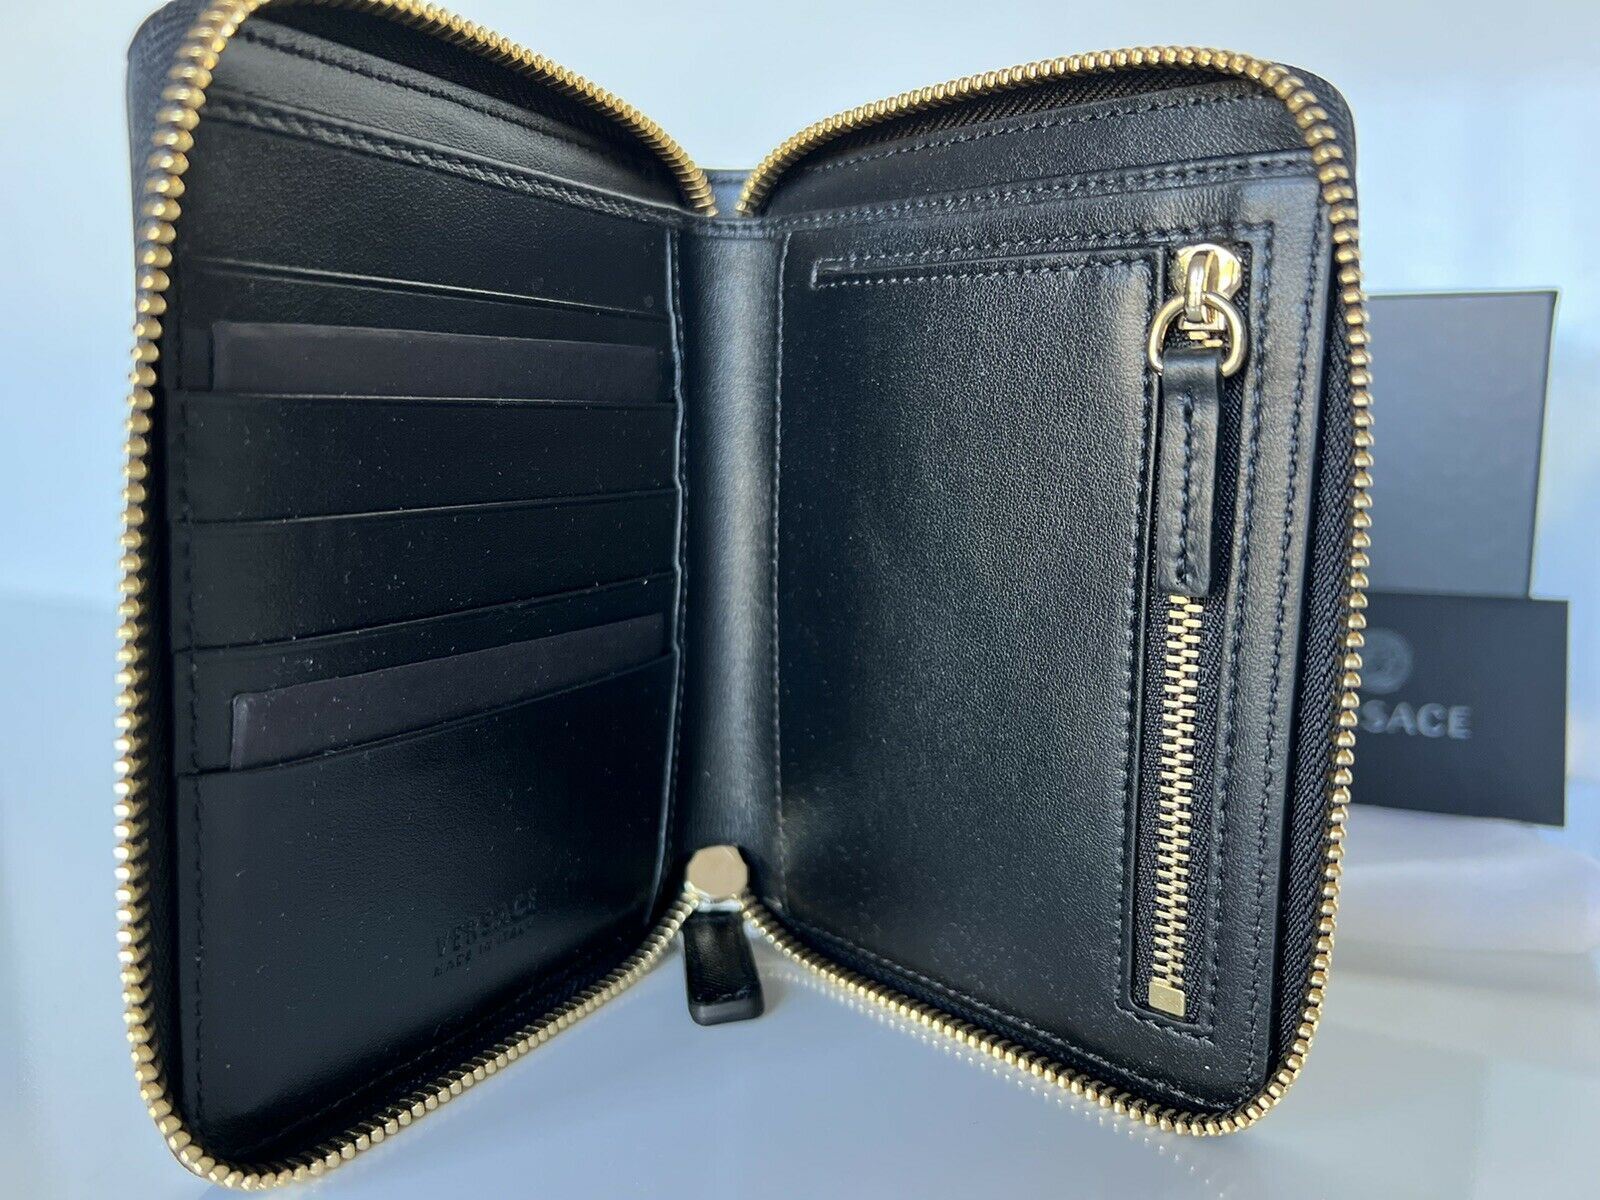 NWT Versace Black Calf Leather Medium Zipper Wallet Made in Italy 593